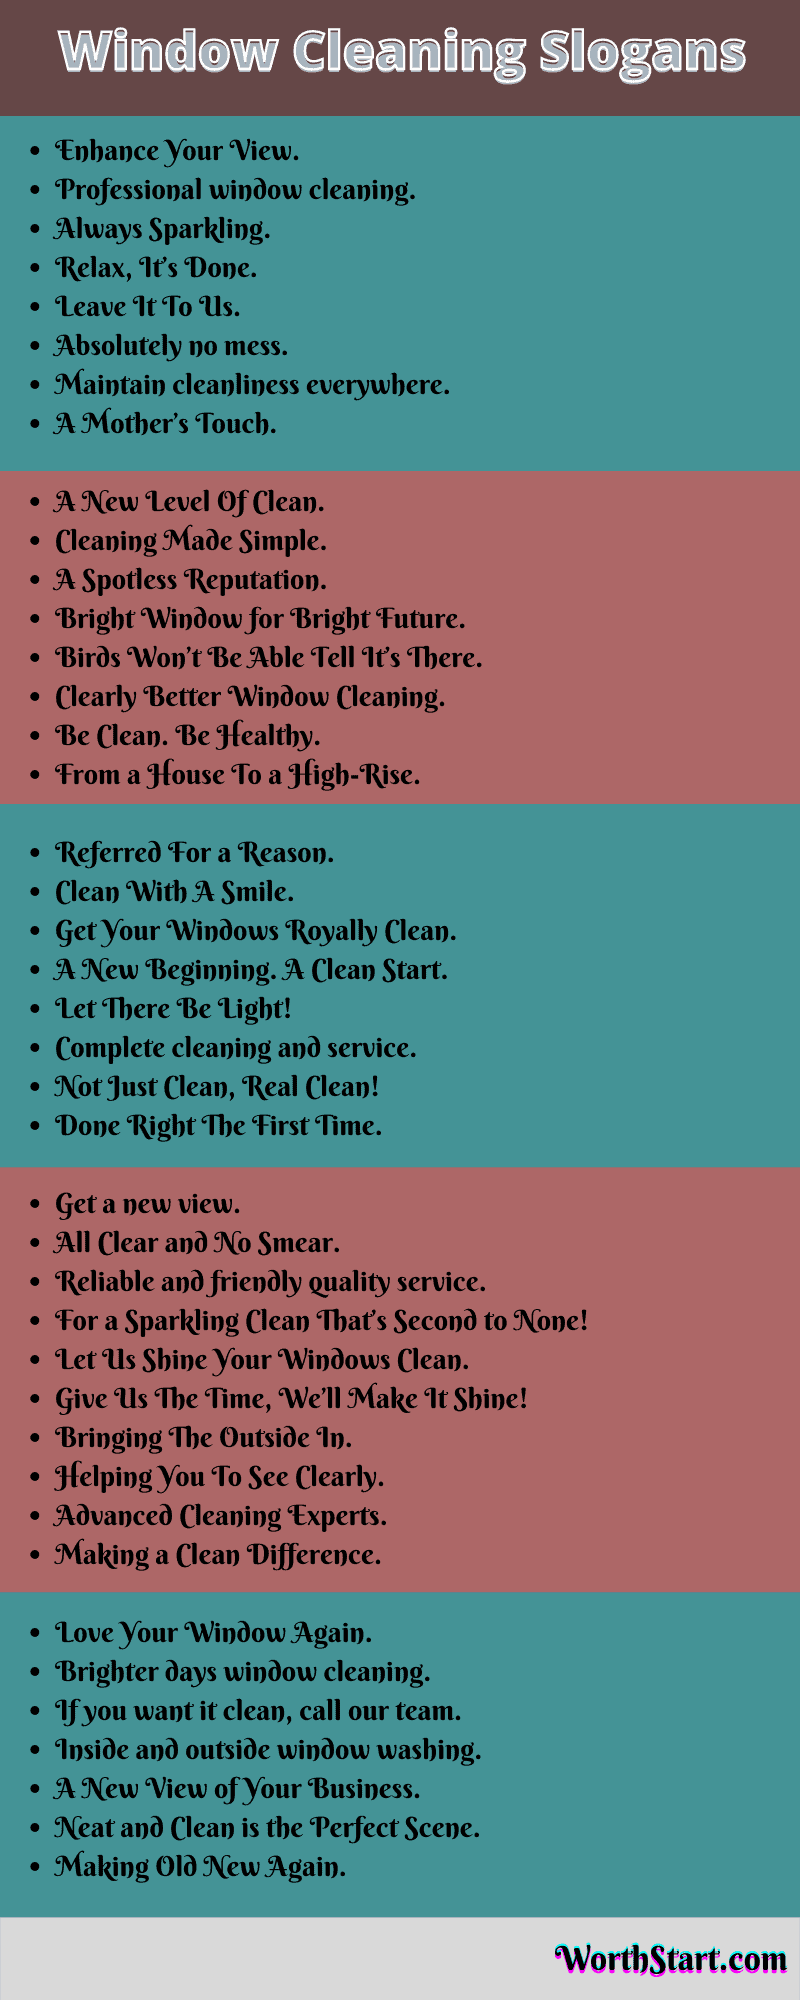 Window Cleaning Slogans